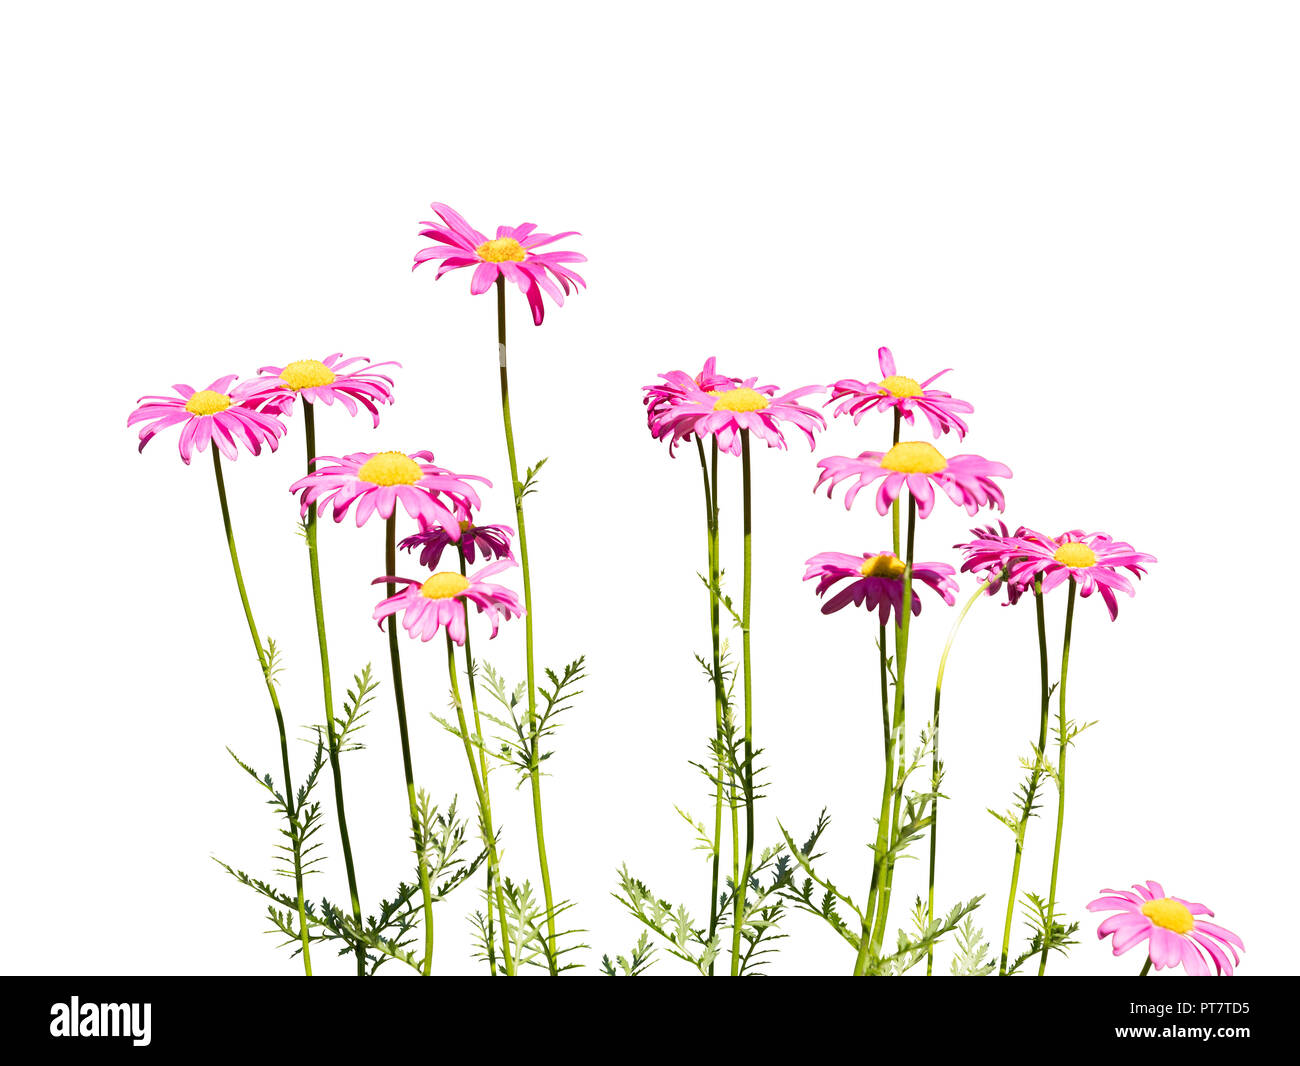 Pink daisy flowers isolated on white background Stock Photo